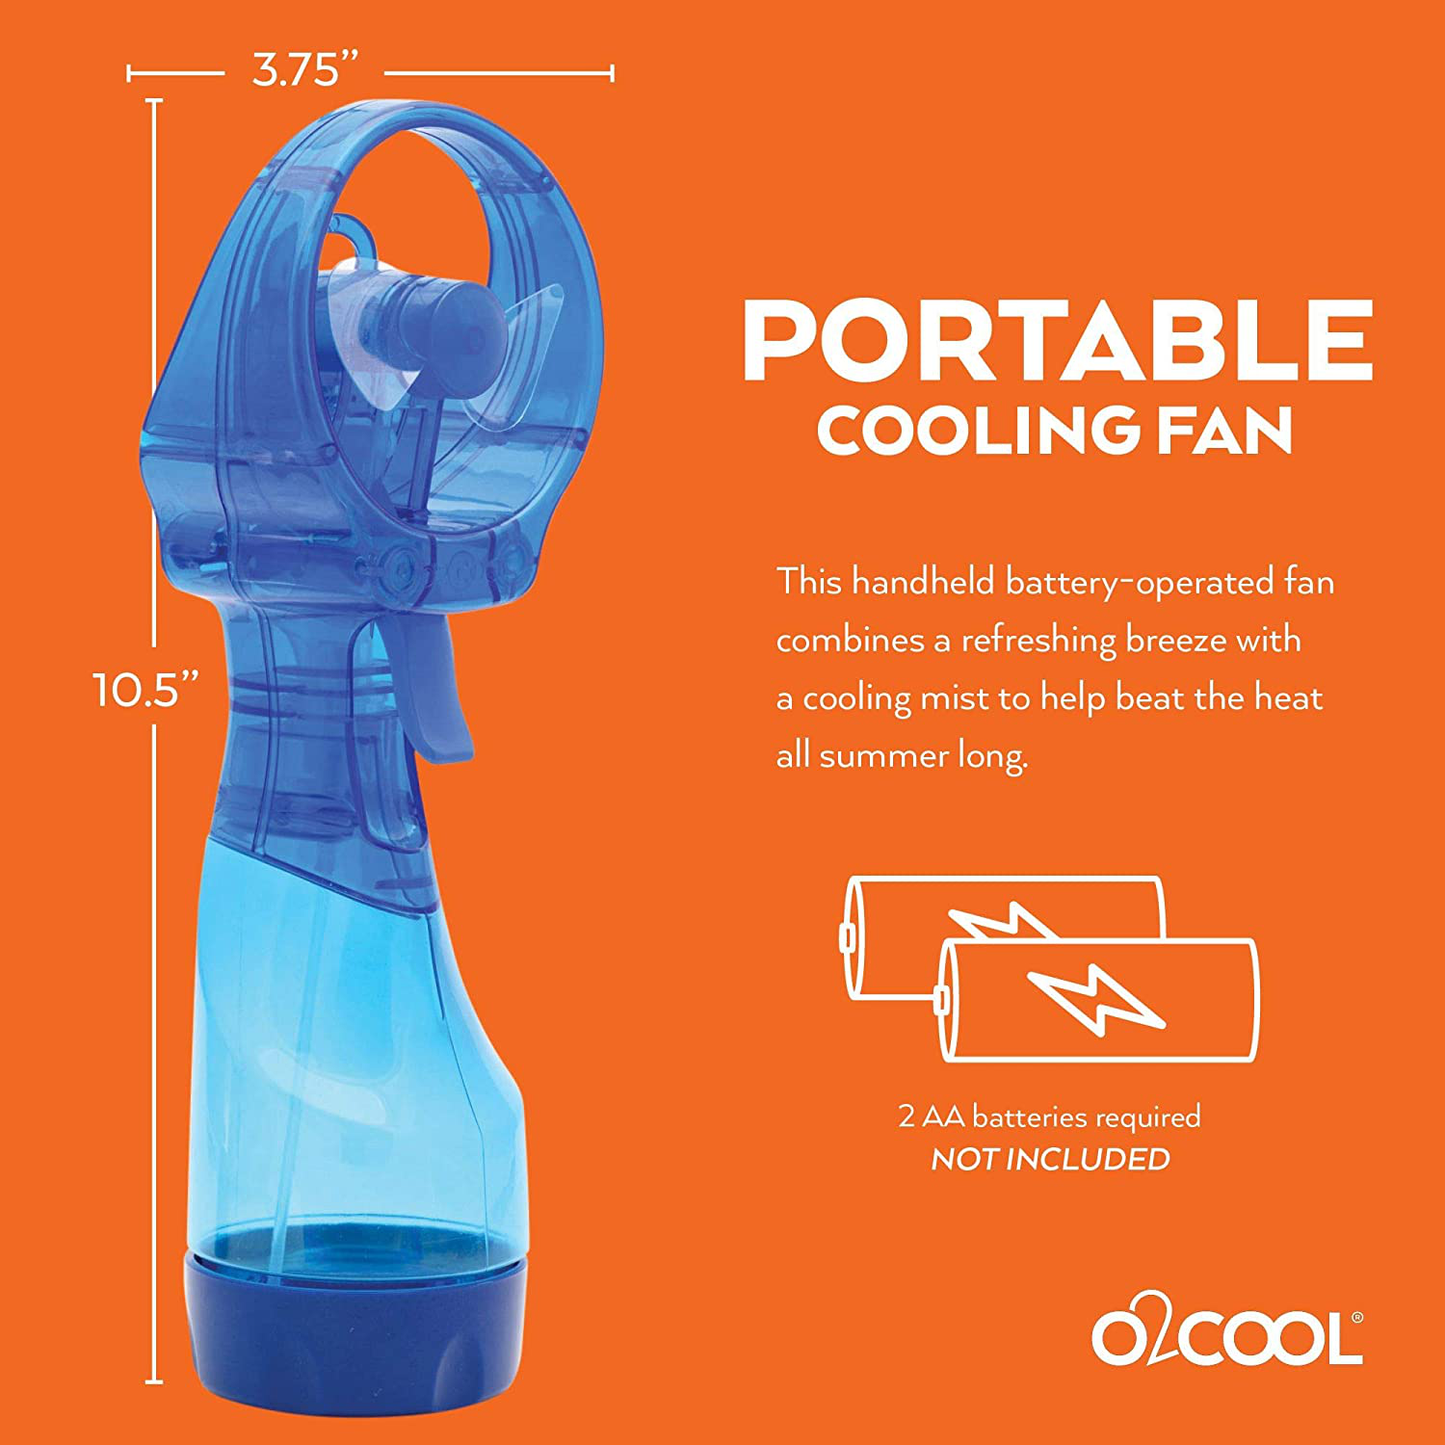 O2COOL Deluxe Misting Personal Fan